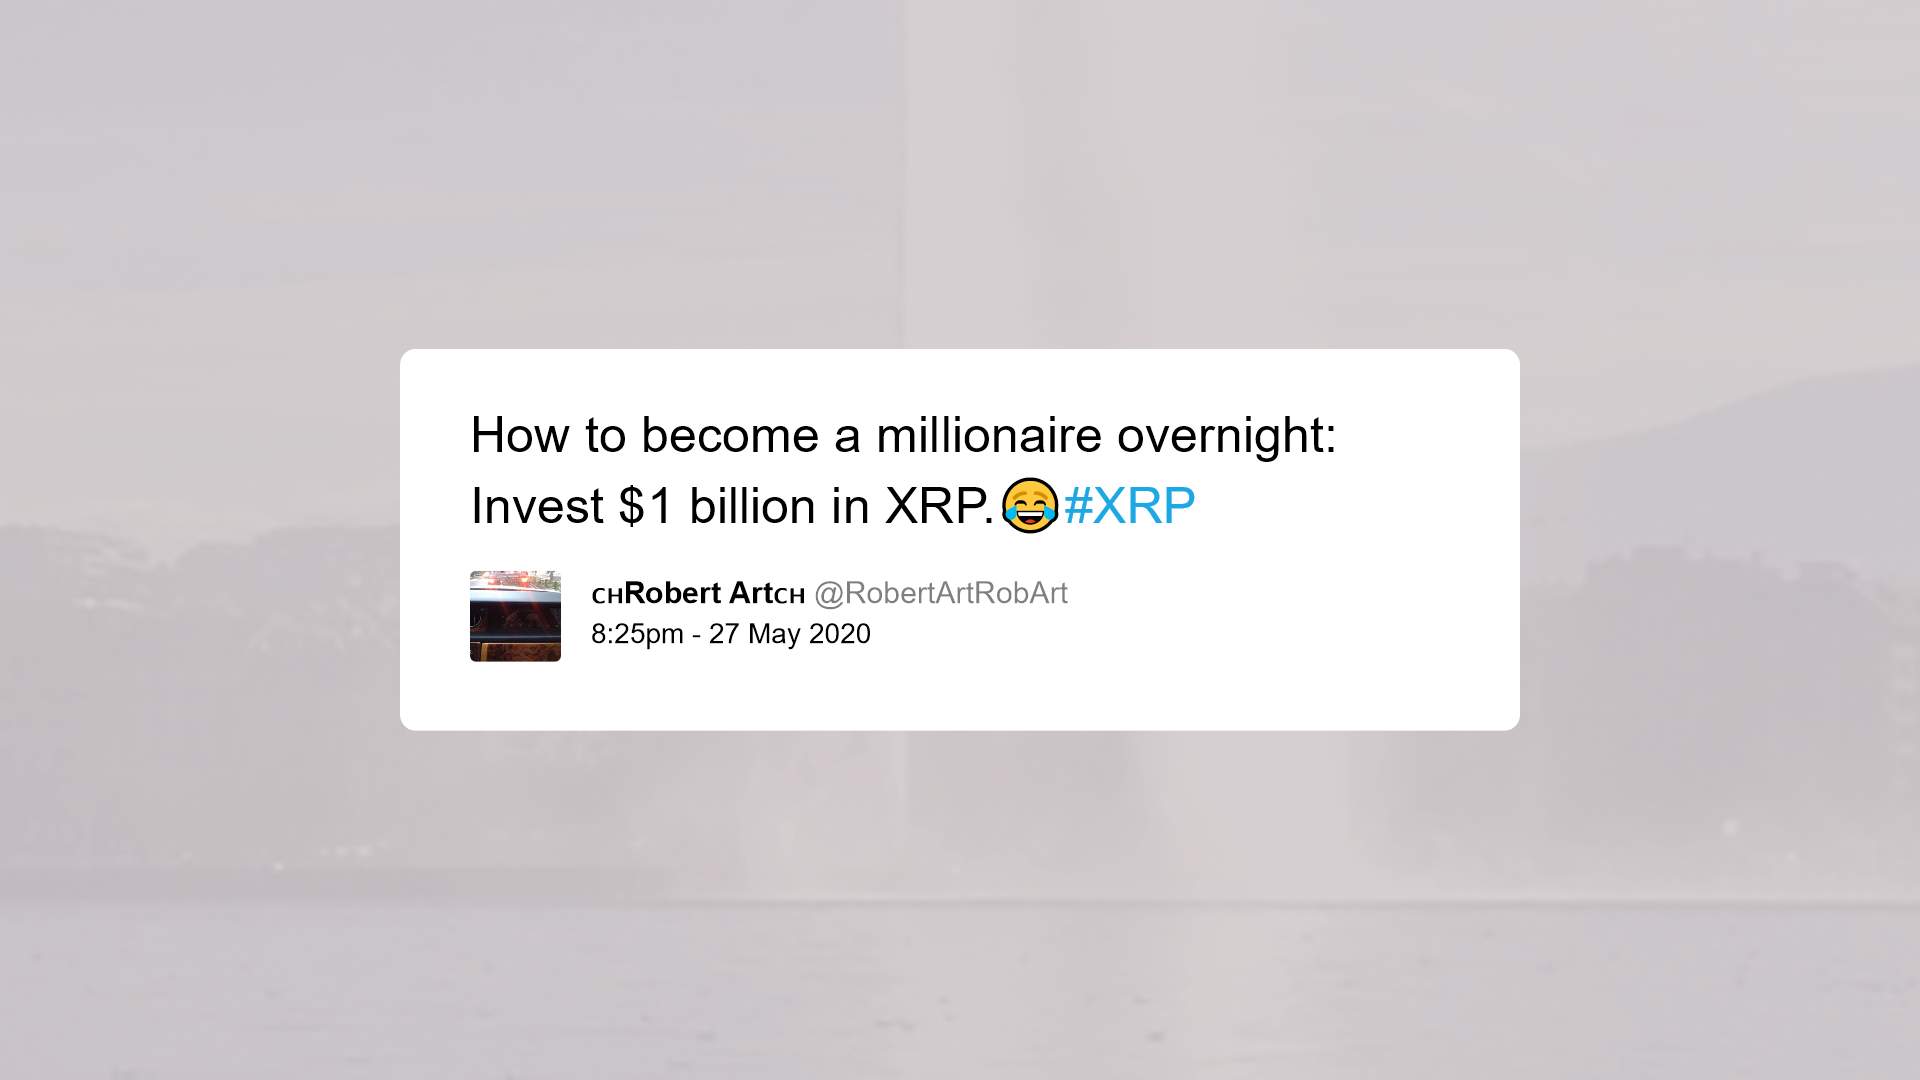 Tweet from pro-Ripple XRP influencer poking fun at the stale price action